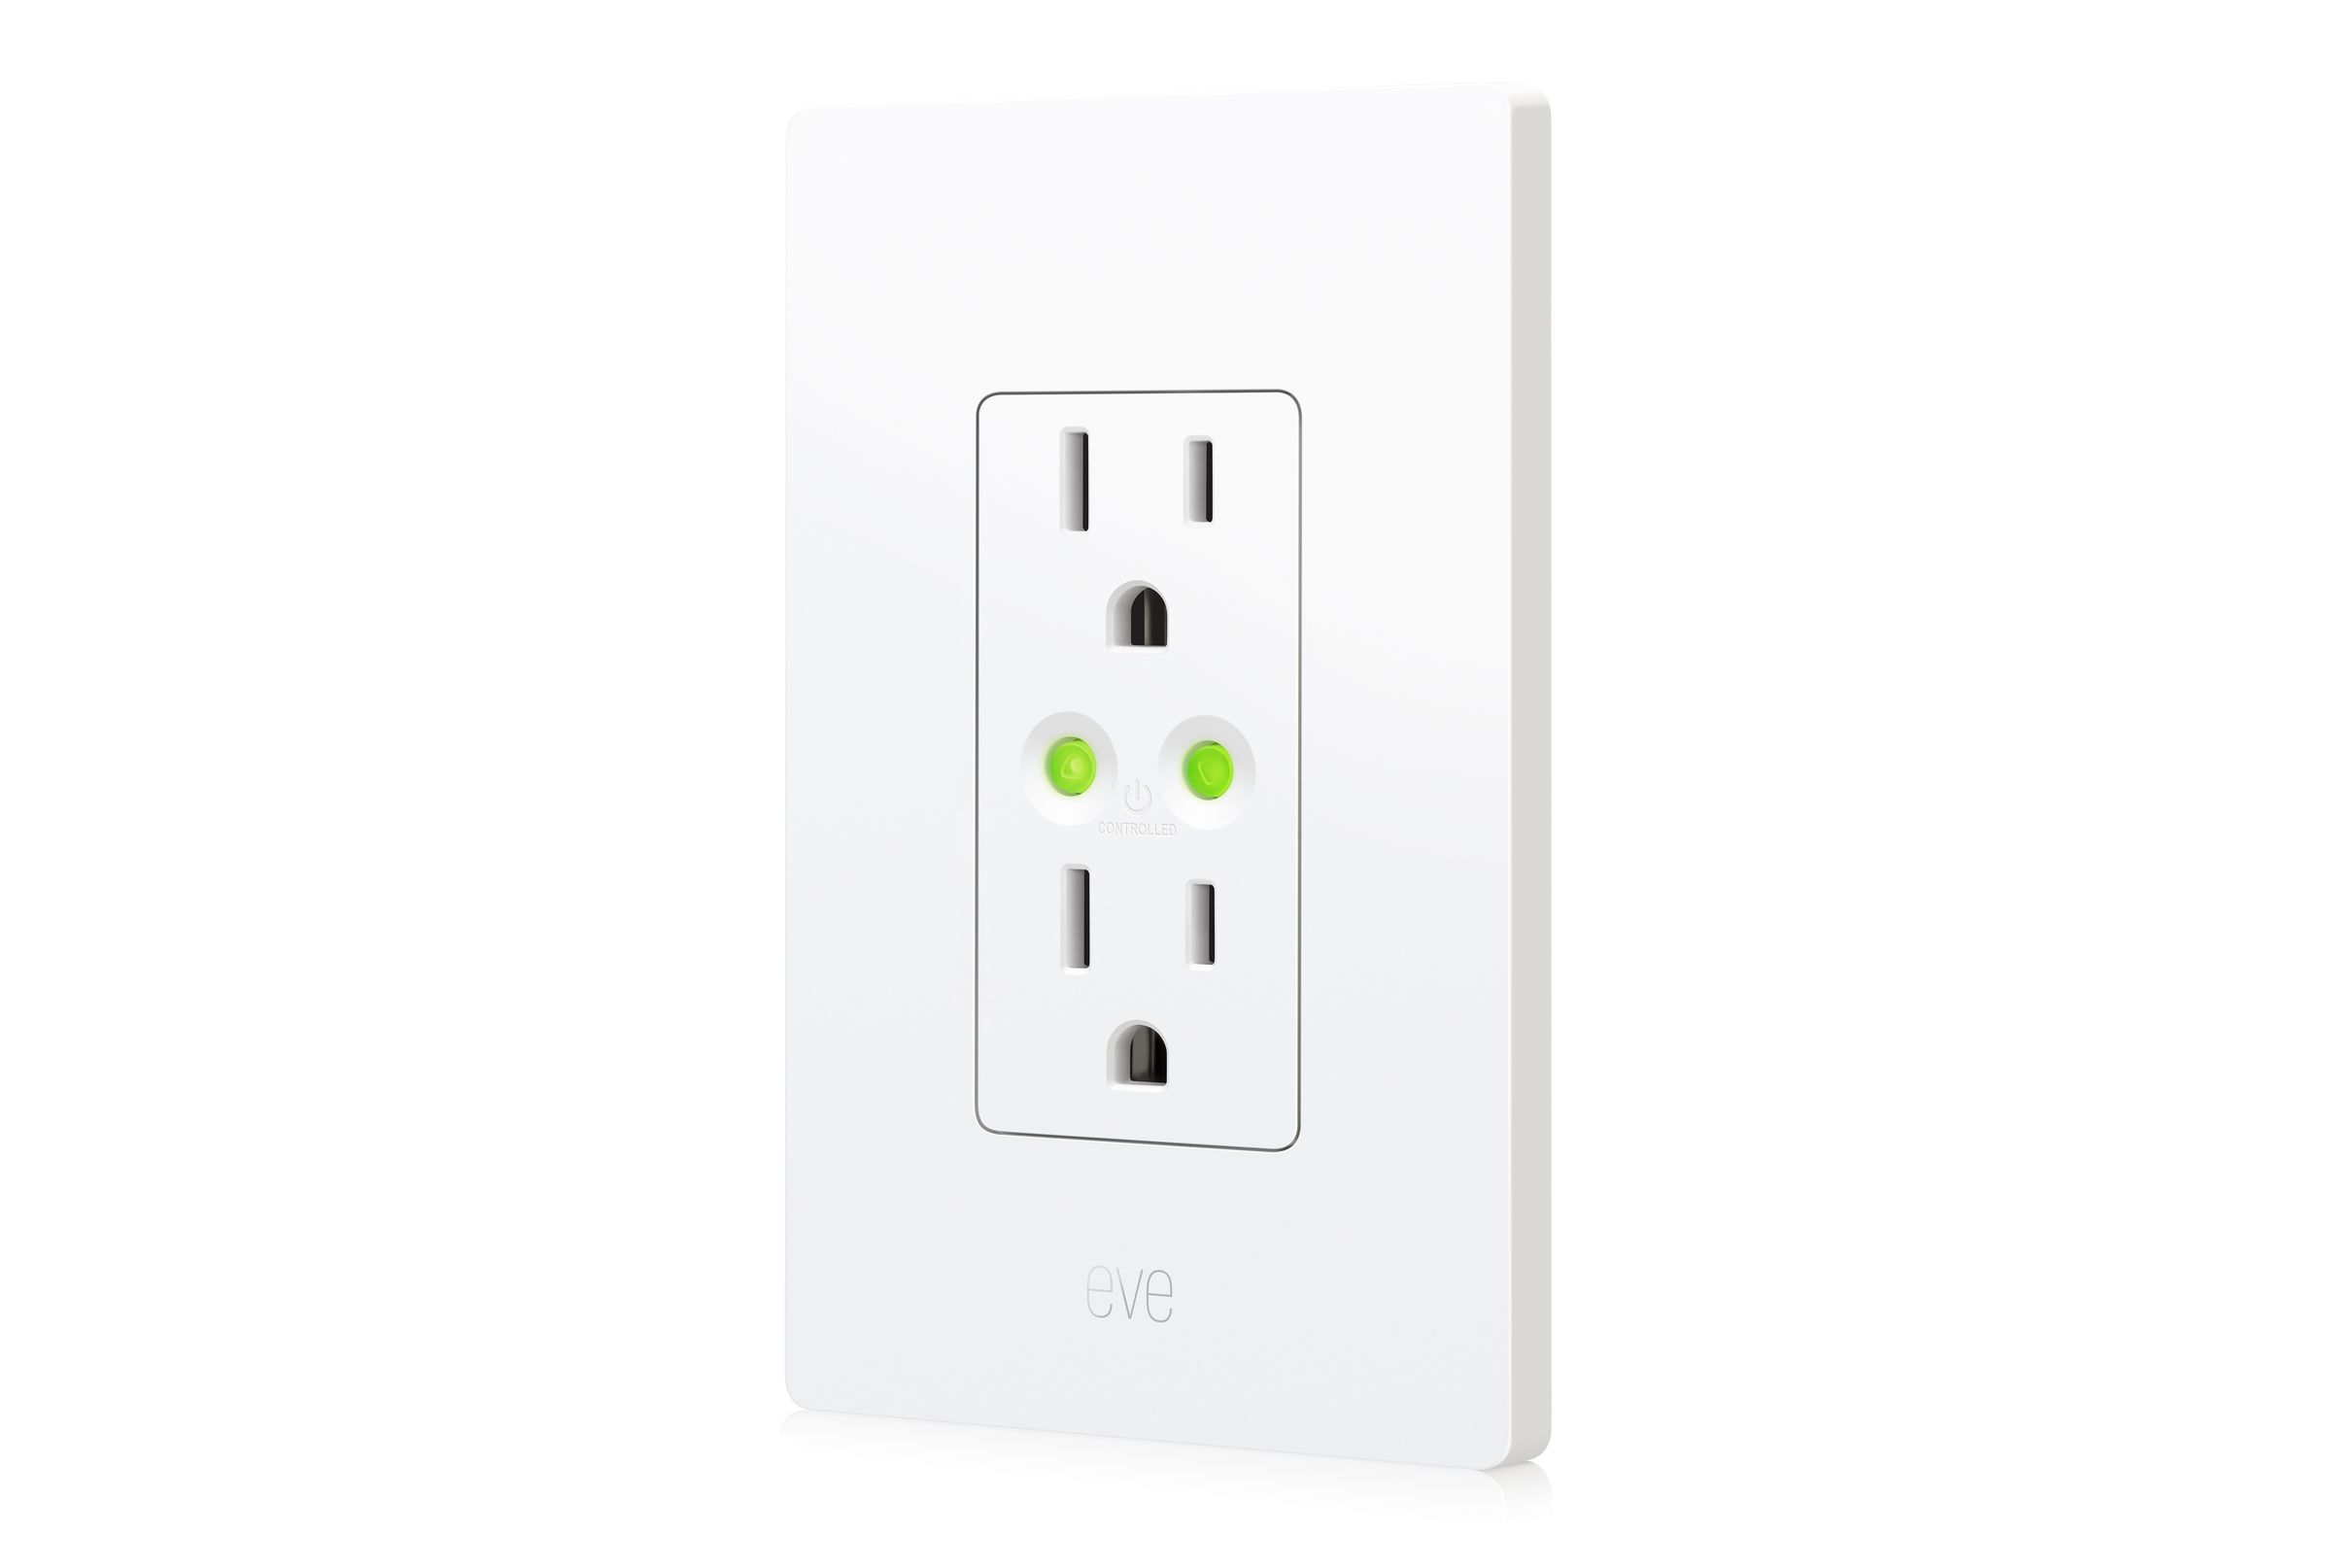 The Eve Energy Outlet has the same specs as the Eve plug, capable of supporting loads up to 15A / 1800W.